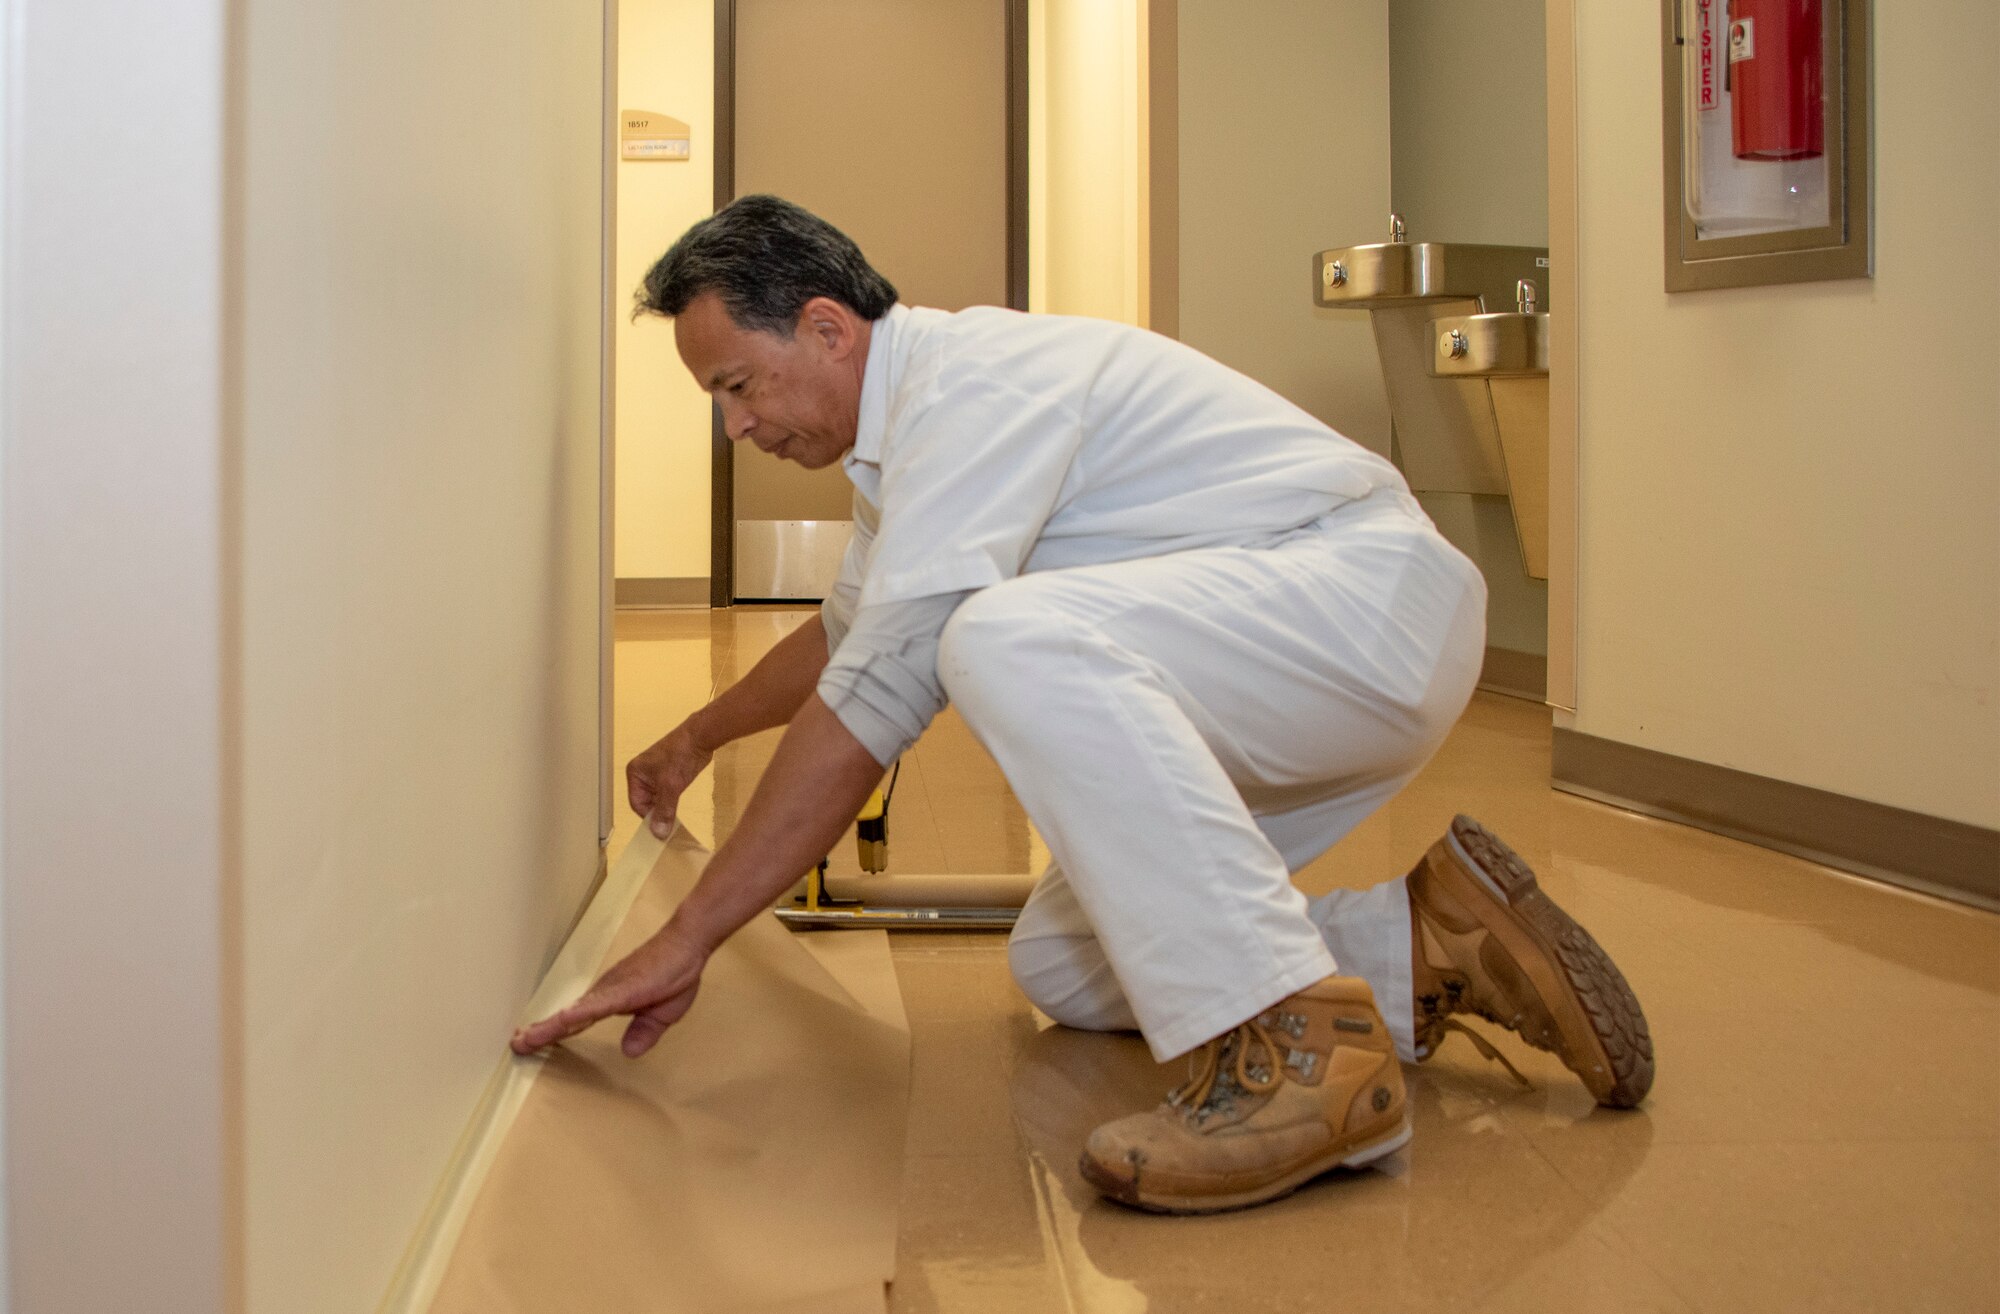 Felix Guevara touches up a wall, Nov. 20, 2018, David Grant U.S. Air Force Medical Center, Travis Air Force Base, California. Guevara has spent the last 30 years walking DGMC repairing and painting walls as well as all the directional signs. Guevara was the first maintenance contractor hired at DGMC in 1988.  He witnessed the building of DGMC from the ground up. (U.S. Air Force Photo by Heide Couch)